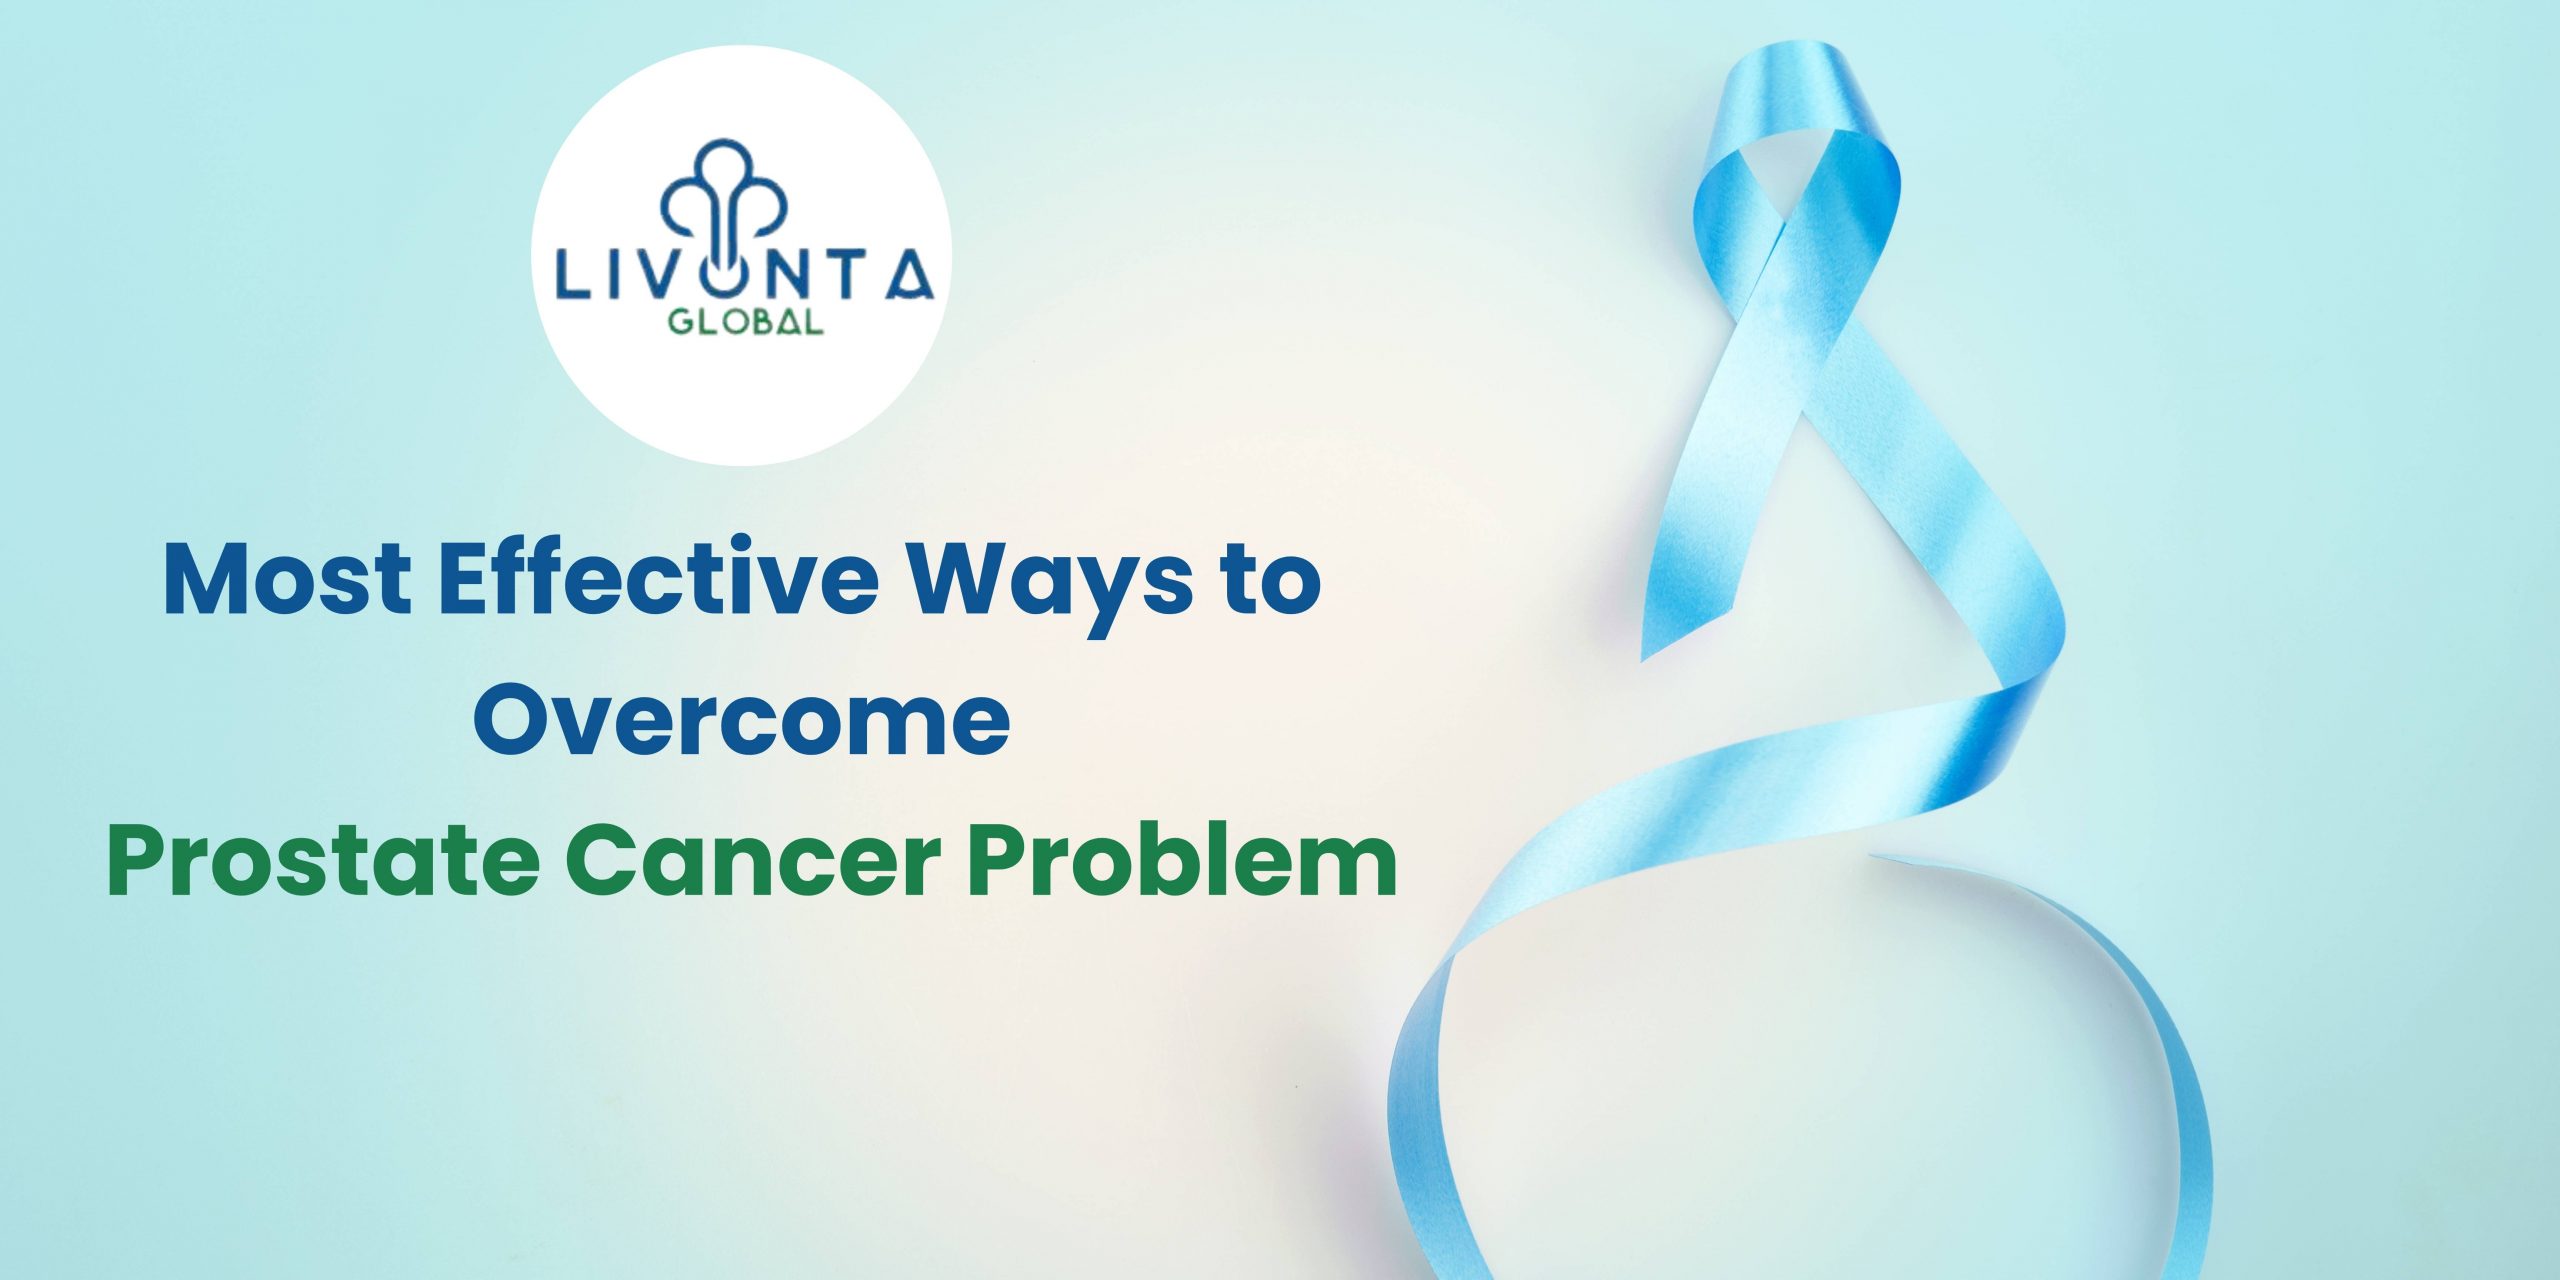 Most Effective Ways to Overcome Prostate Cancer Problem